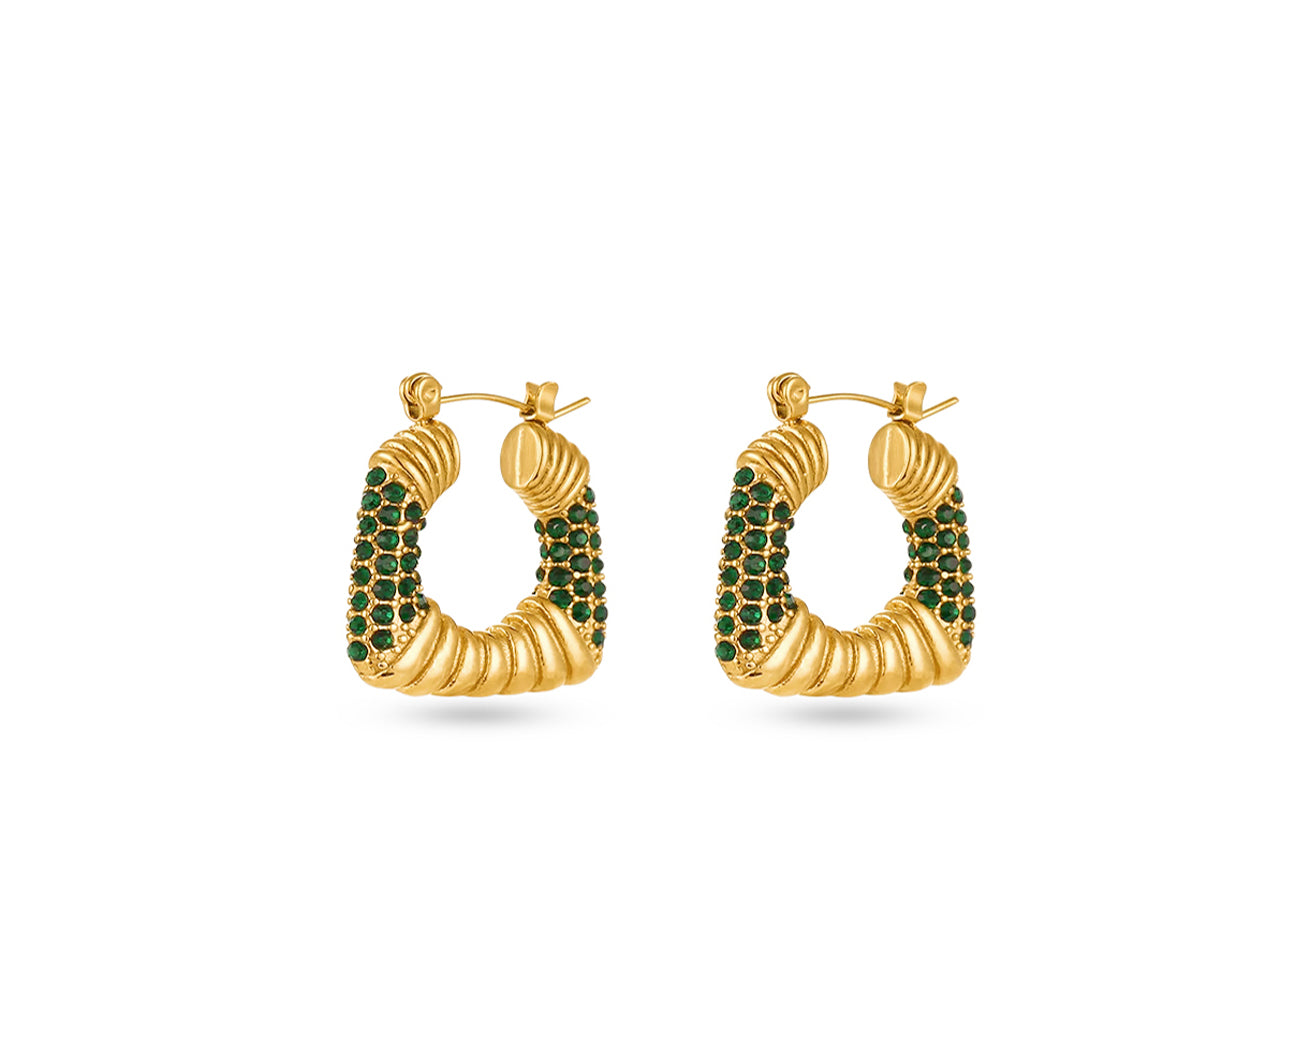 FAX Jewelry | 'Cleo' Square Hoop Earrings | Latch Back | Emerald Green Zircon Stones Against 18 karat gold plated stainless steel